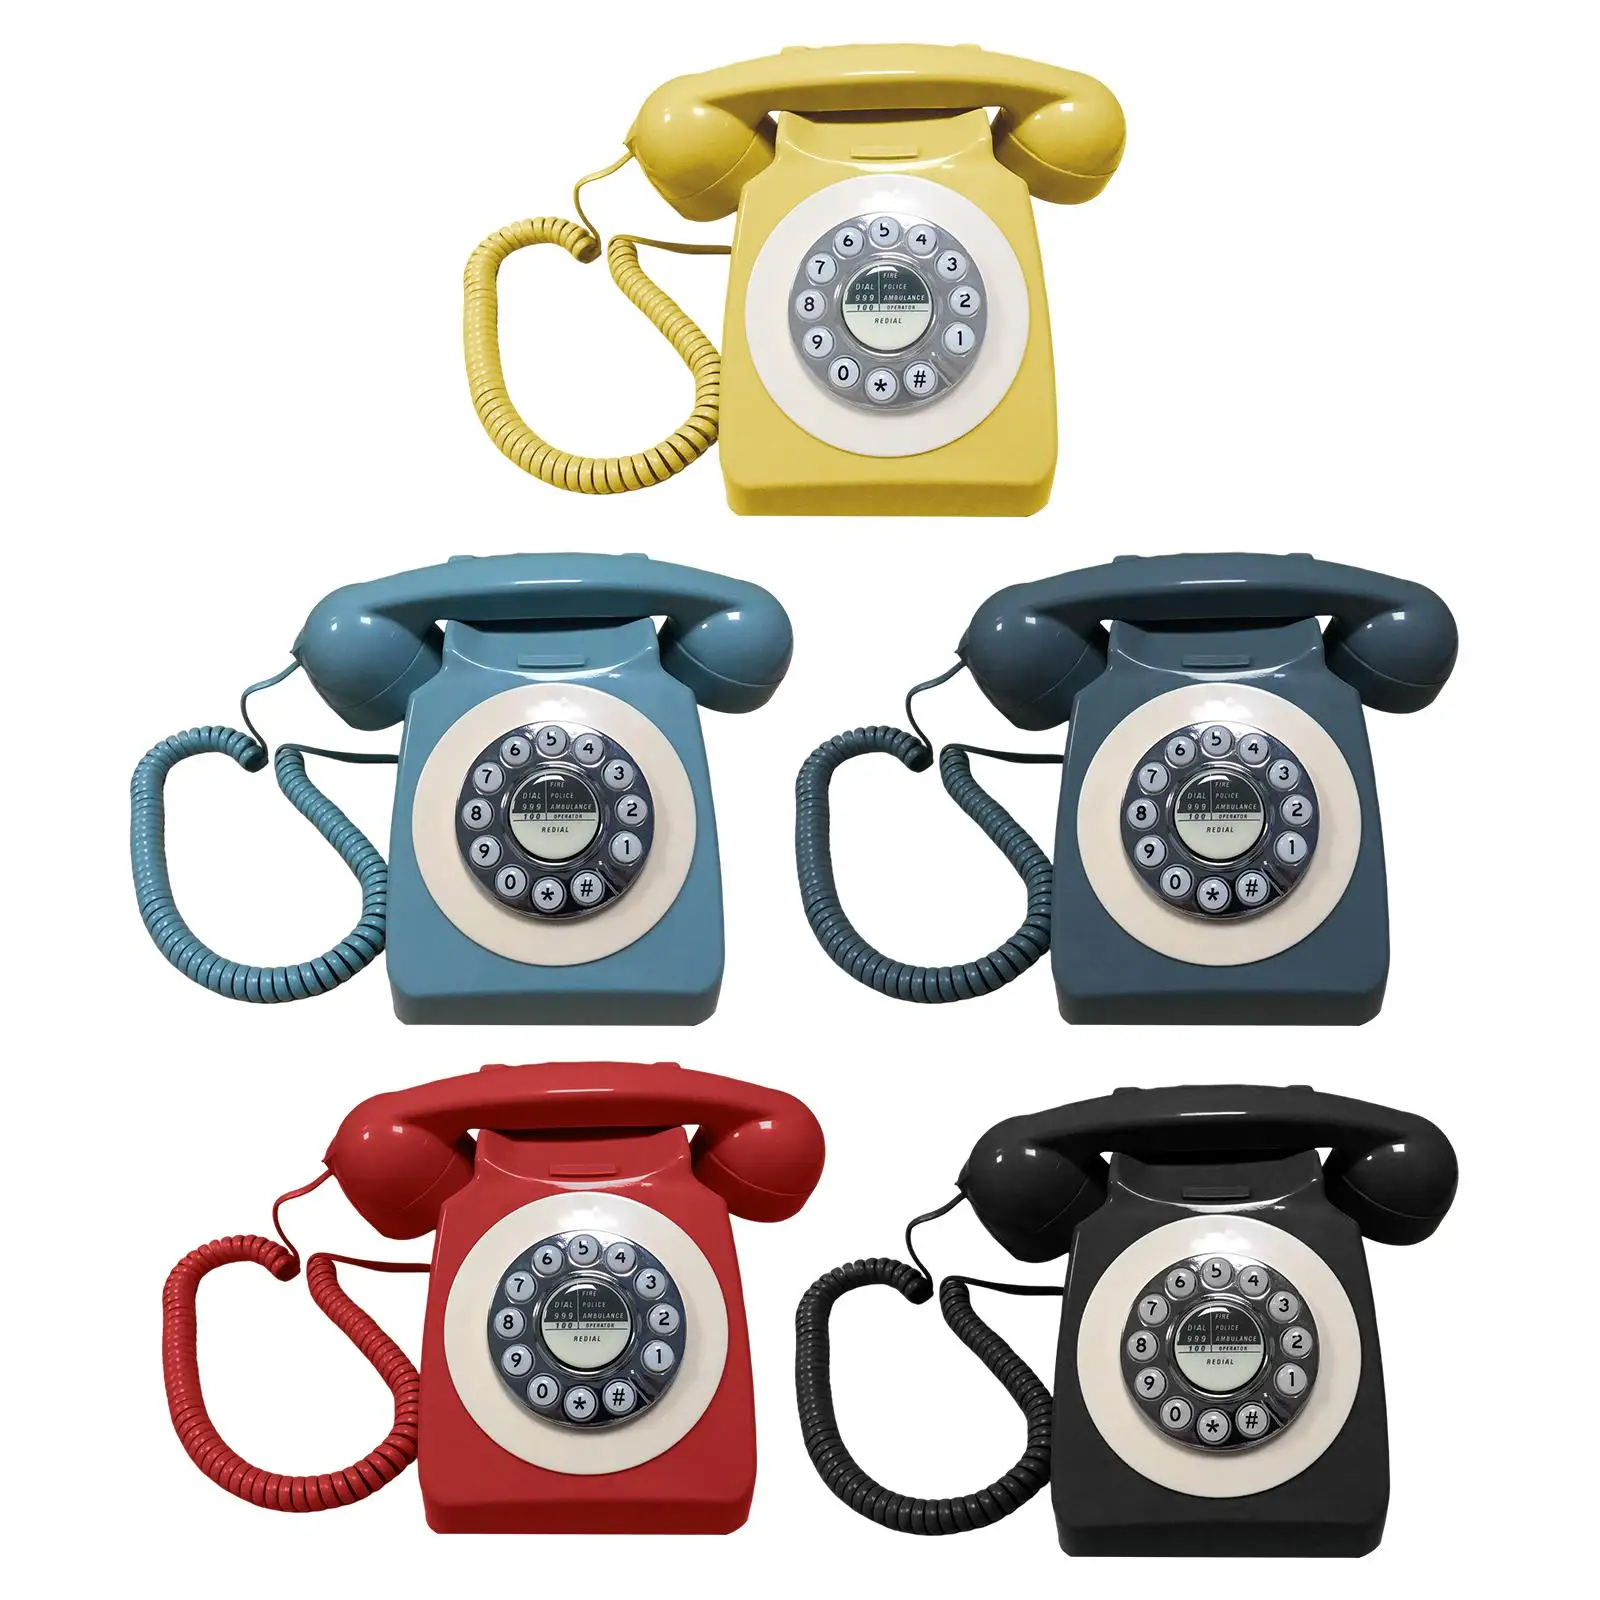 Retro Landline Phone Old Style Classic Antique Telephone with Redial for Home Hotel Use